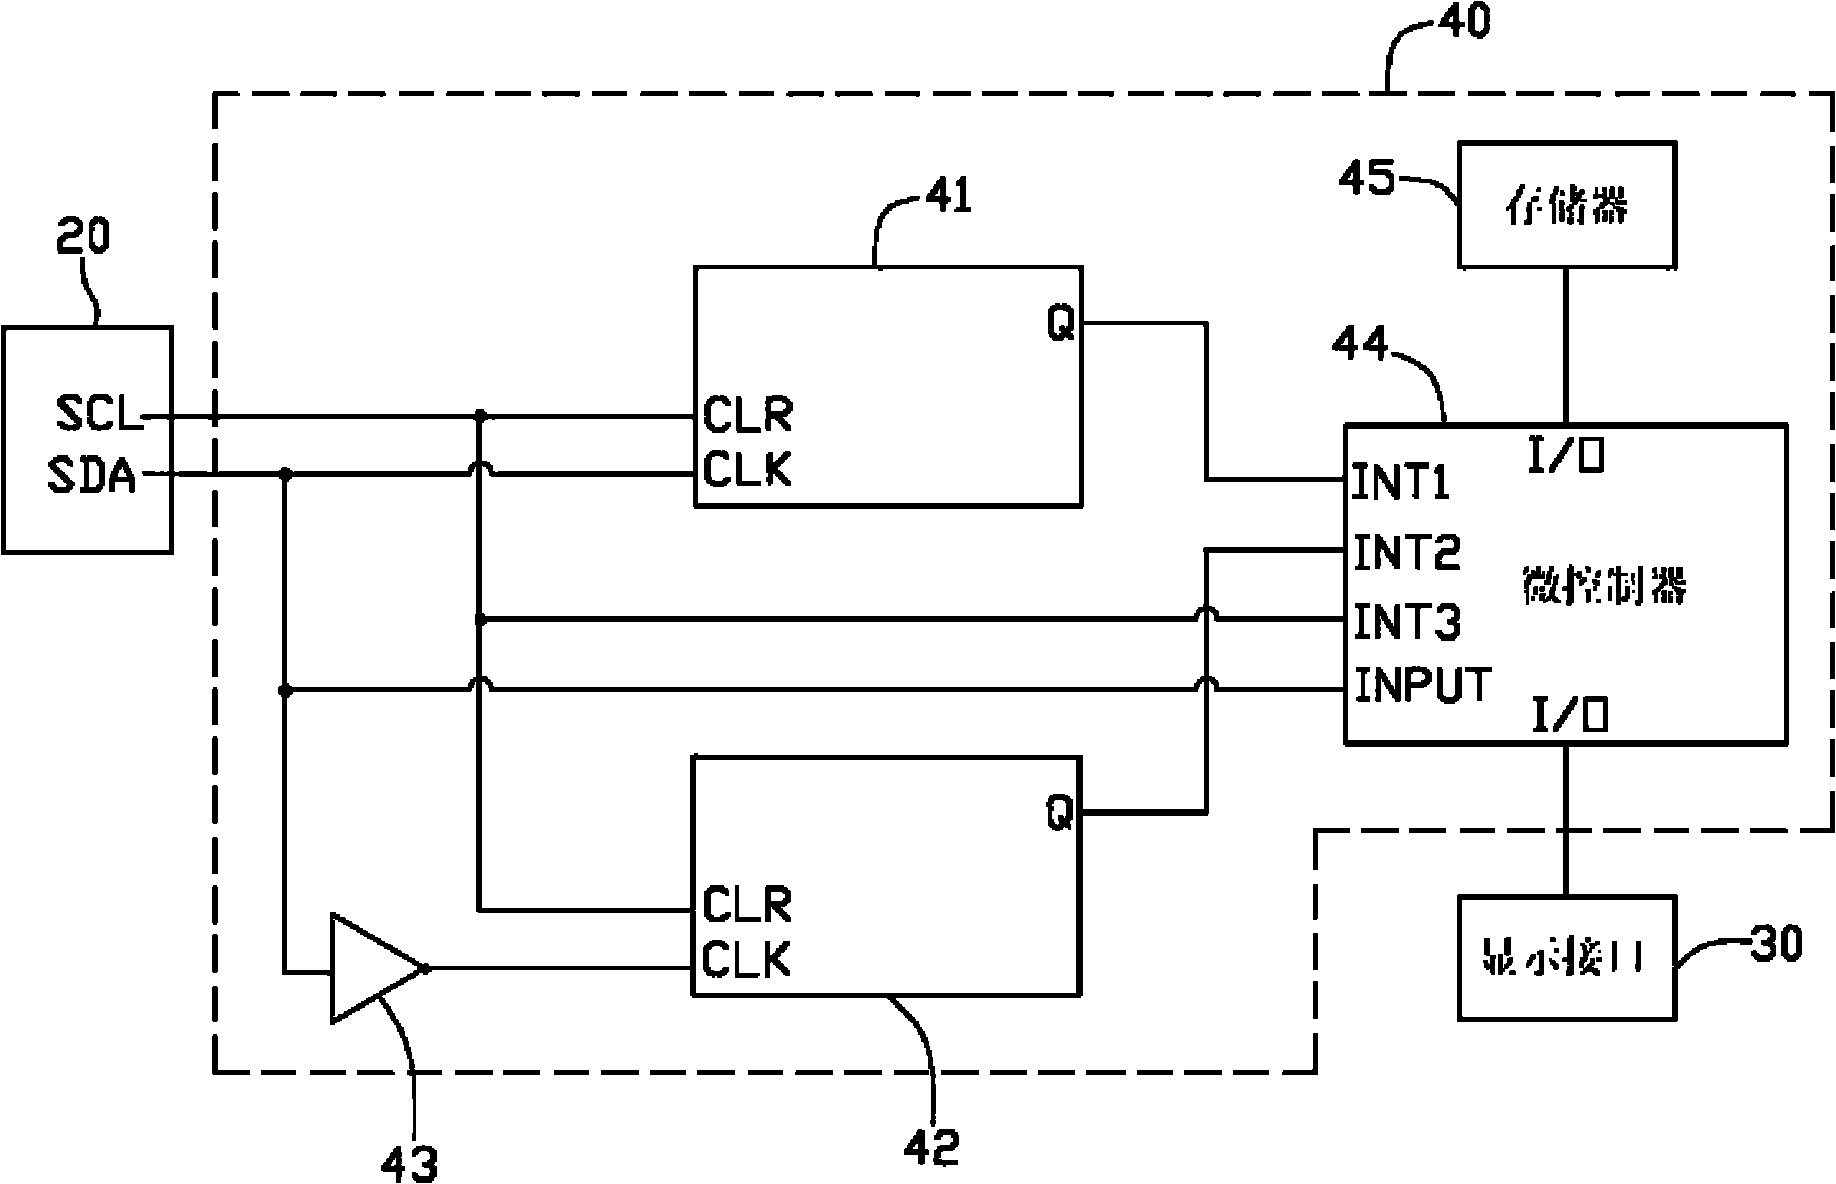 I2C (inter-integrated circuit) bus detection device